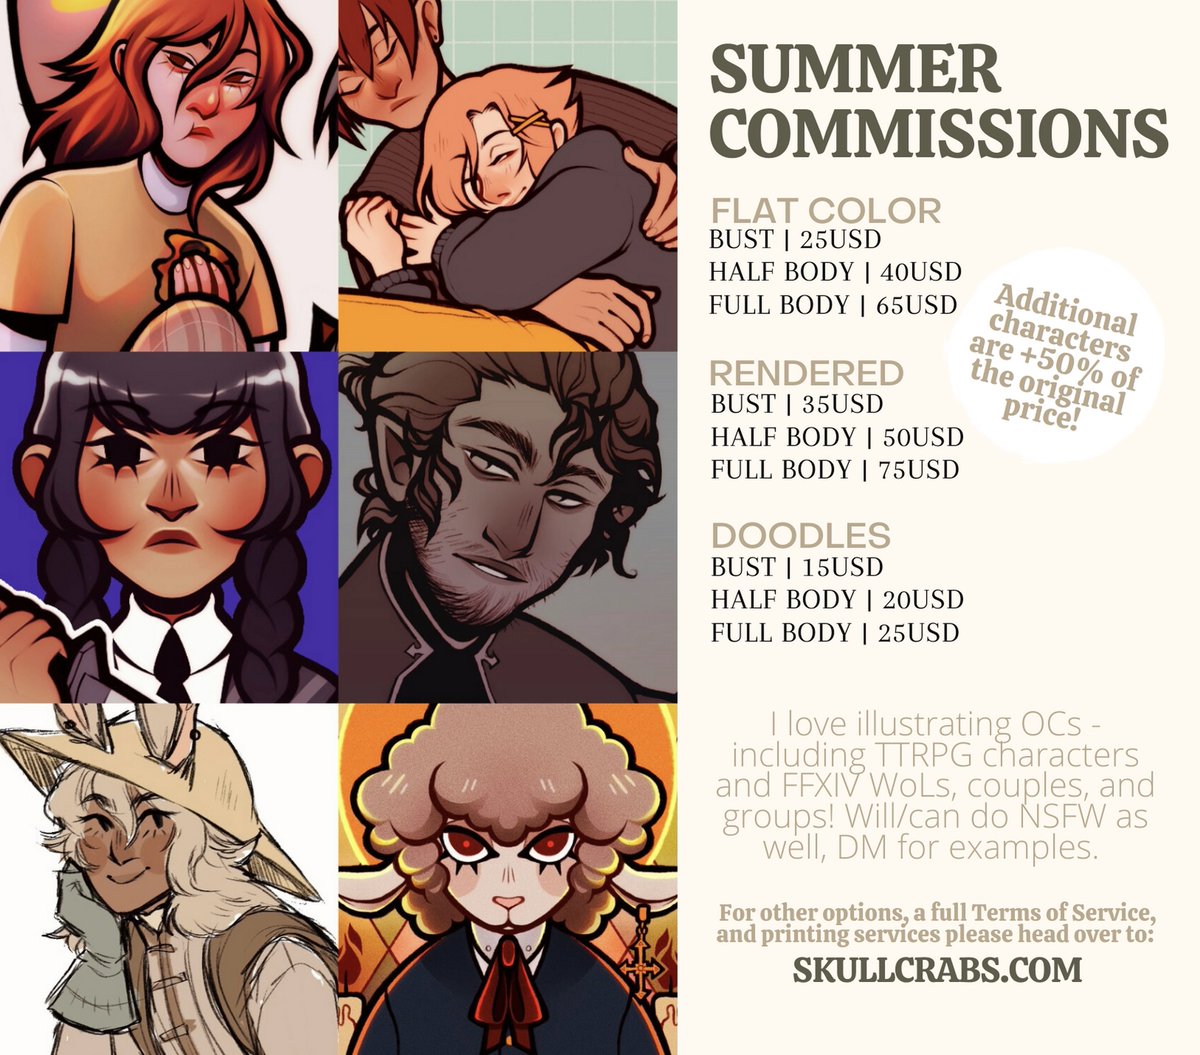 🌾SUMMER COMMISSIONS🌾 [RTs very much appreciated] 🌤️ Slots open for June/July! 🌤️ Backgrounds/pets/etc. prices in website. 🌤️ Feel free to DM me for inquiries or any questions you might have.